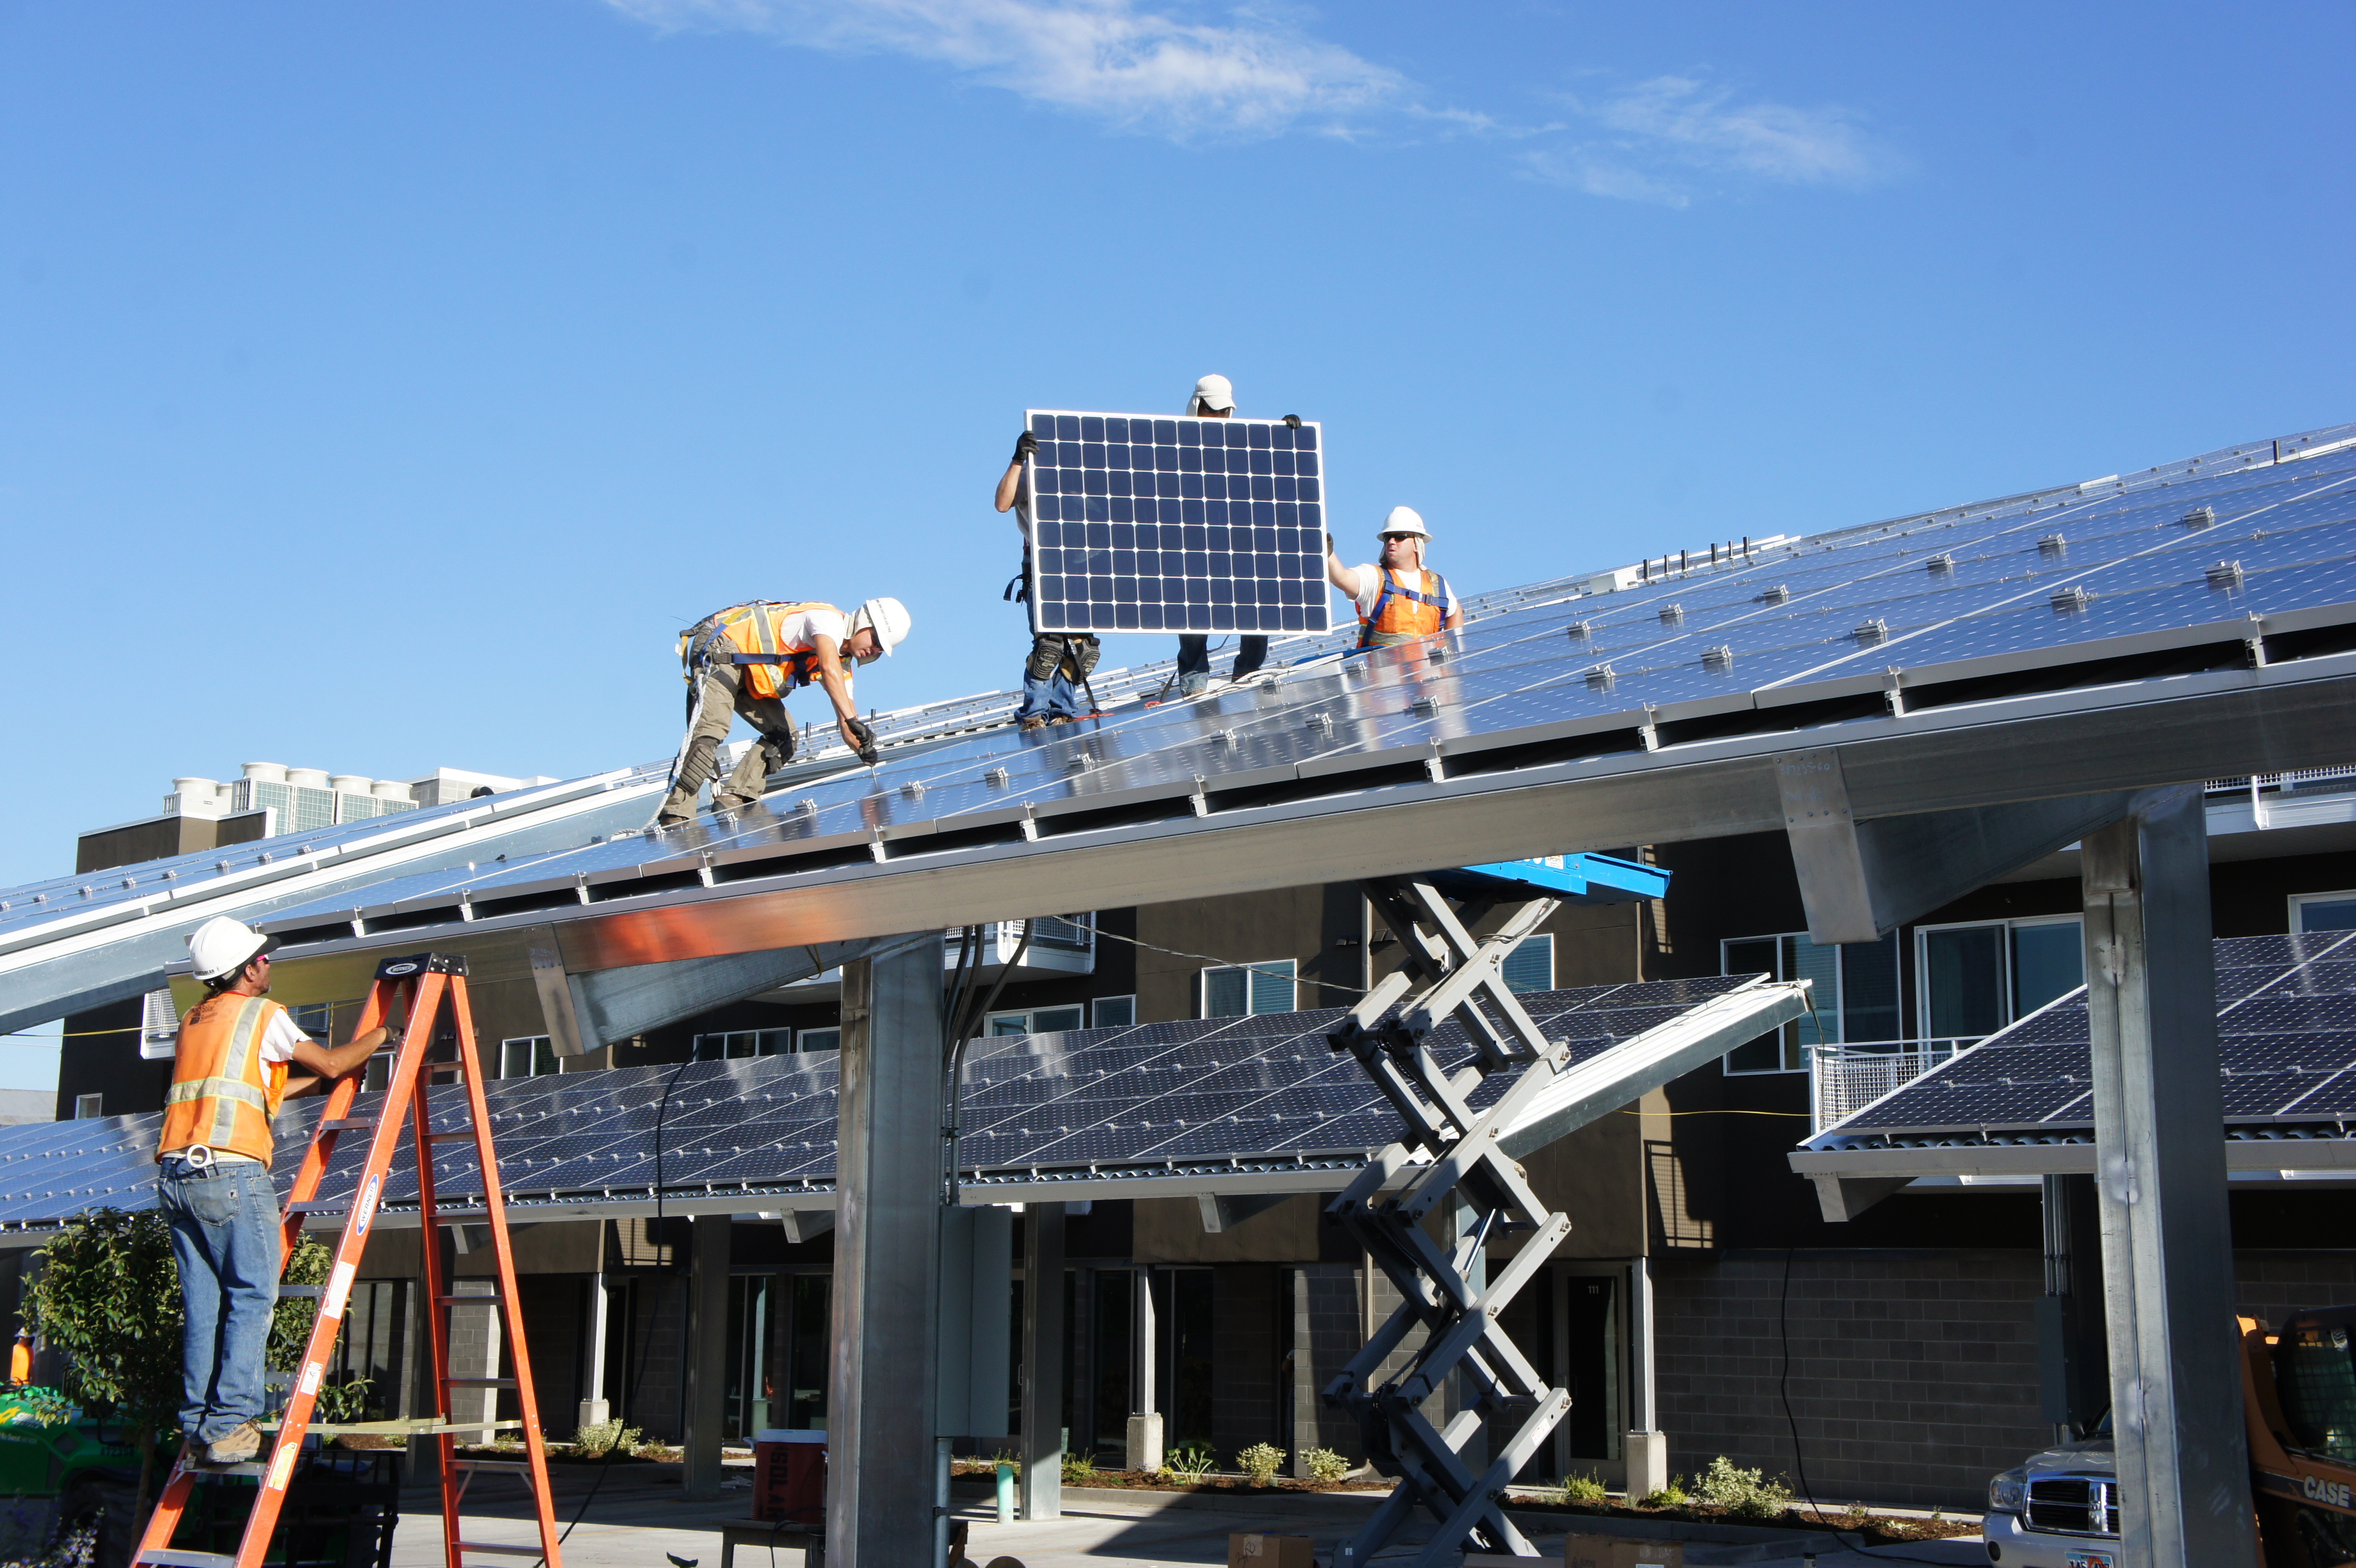 Crews install the carport’s modules using scissor lifts during the complex’s construction.